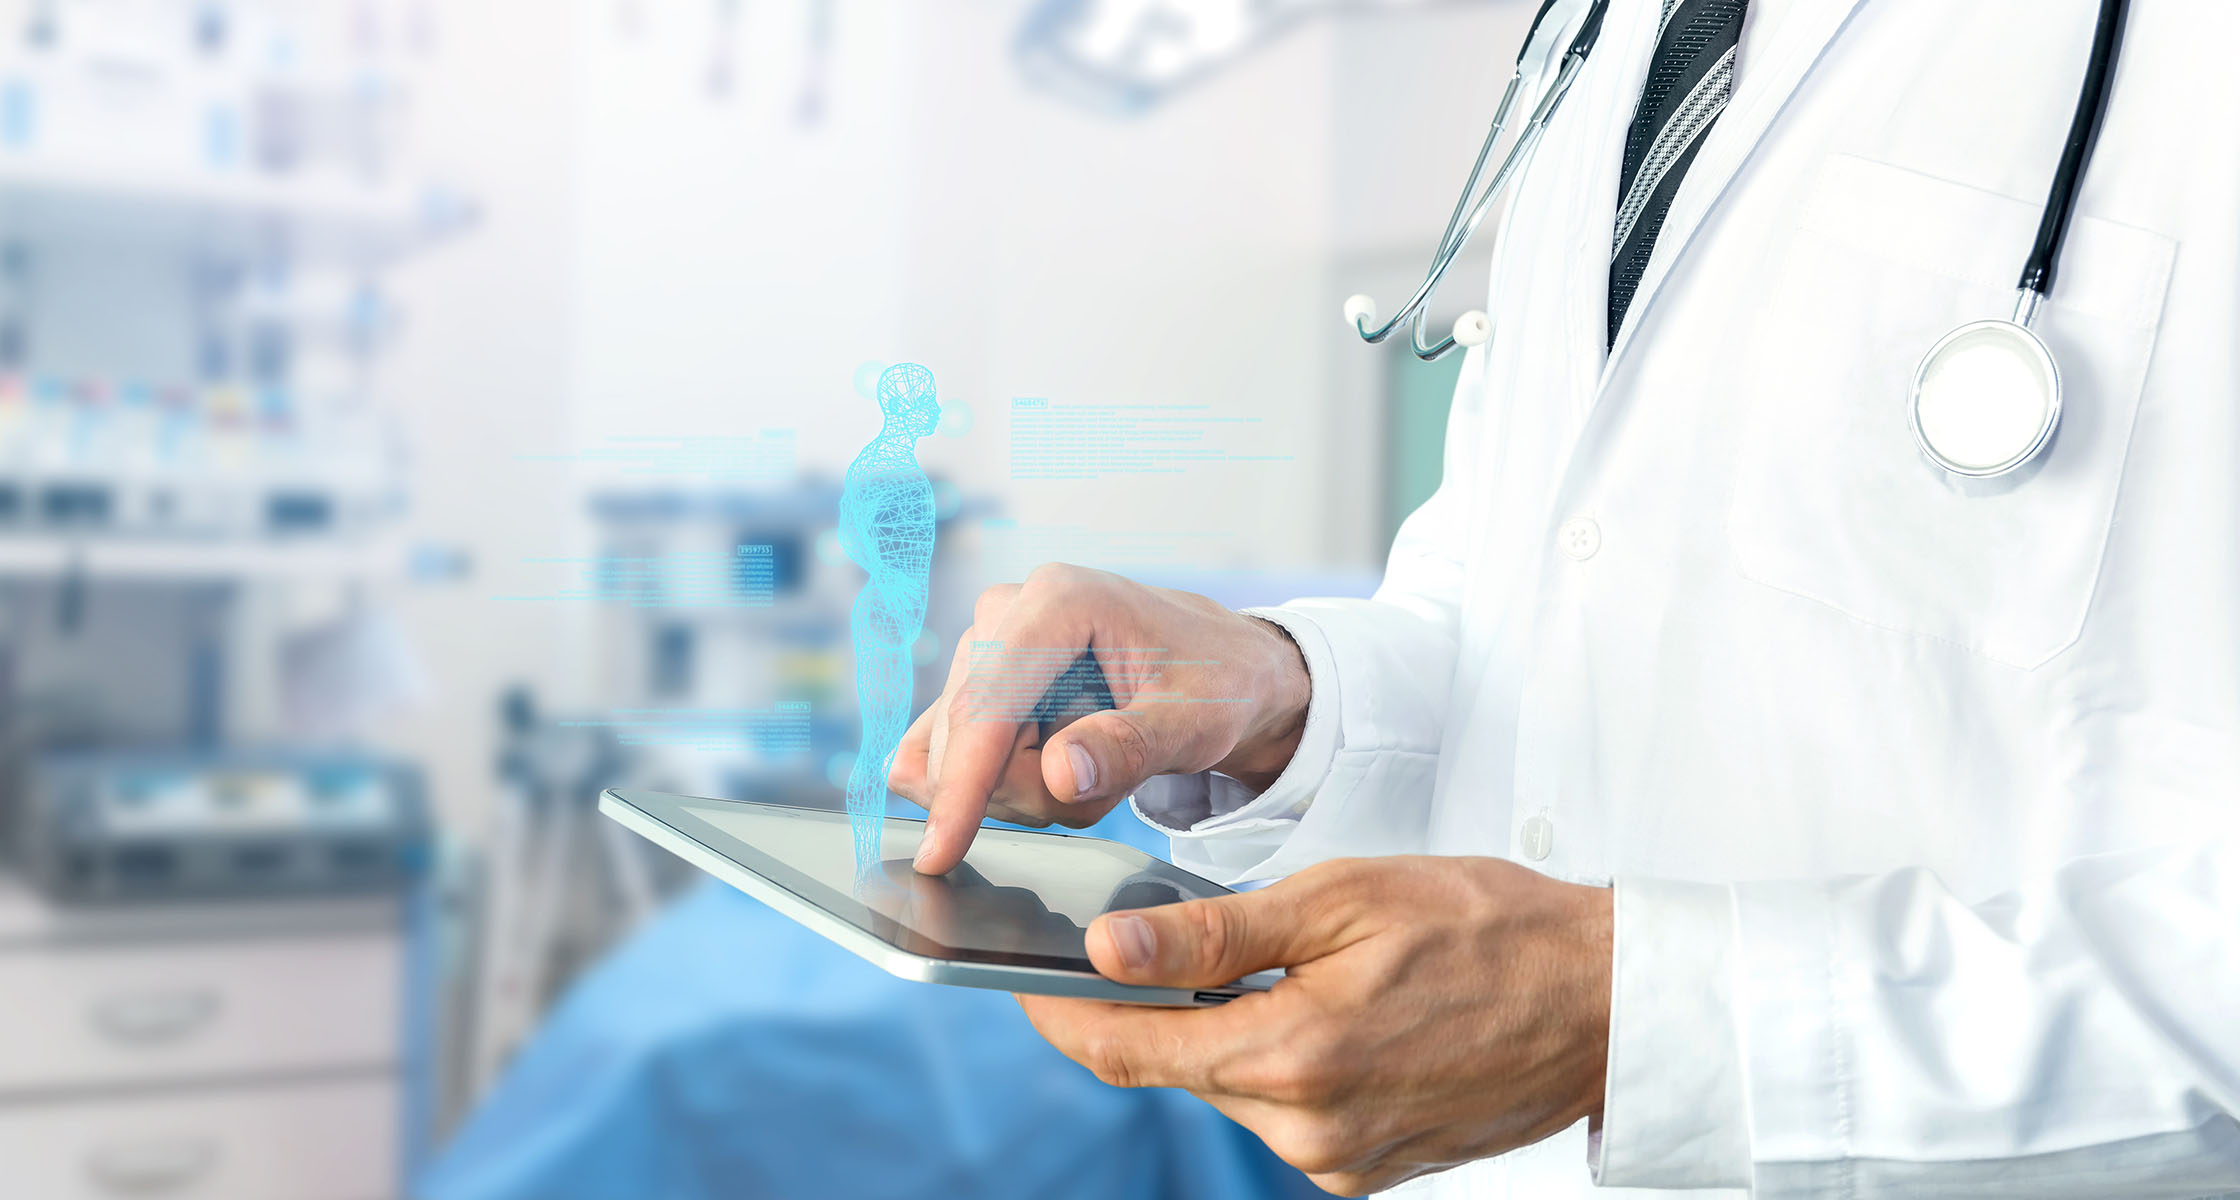 Healthcare Chatbots Market Is Estimated To Witness High Growth Owing To Increasing Demand For Instant Assistance